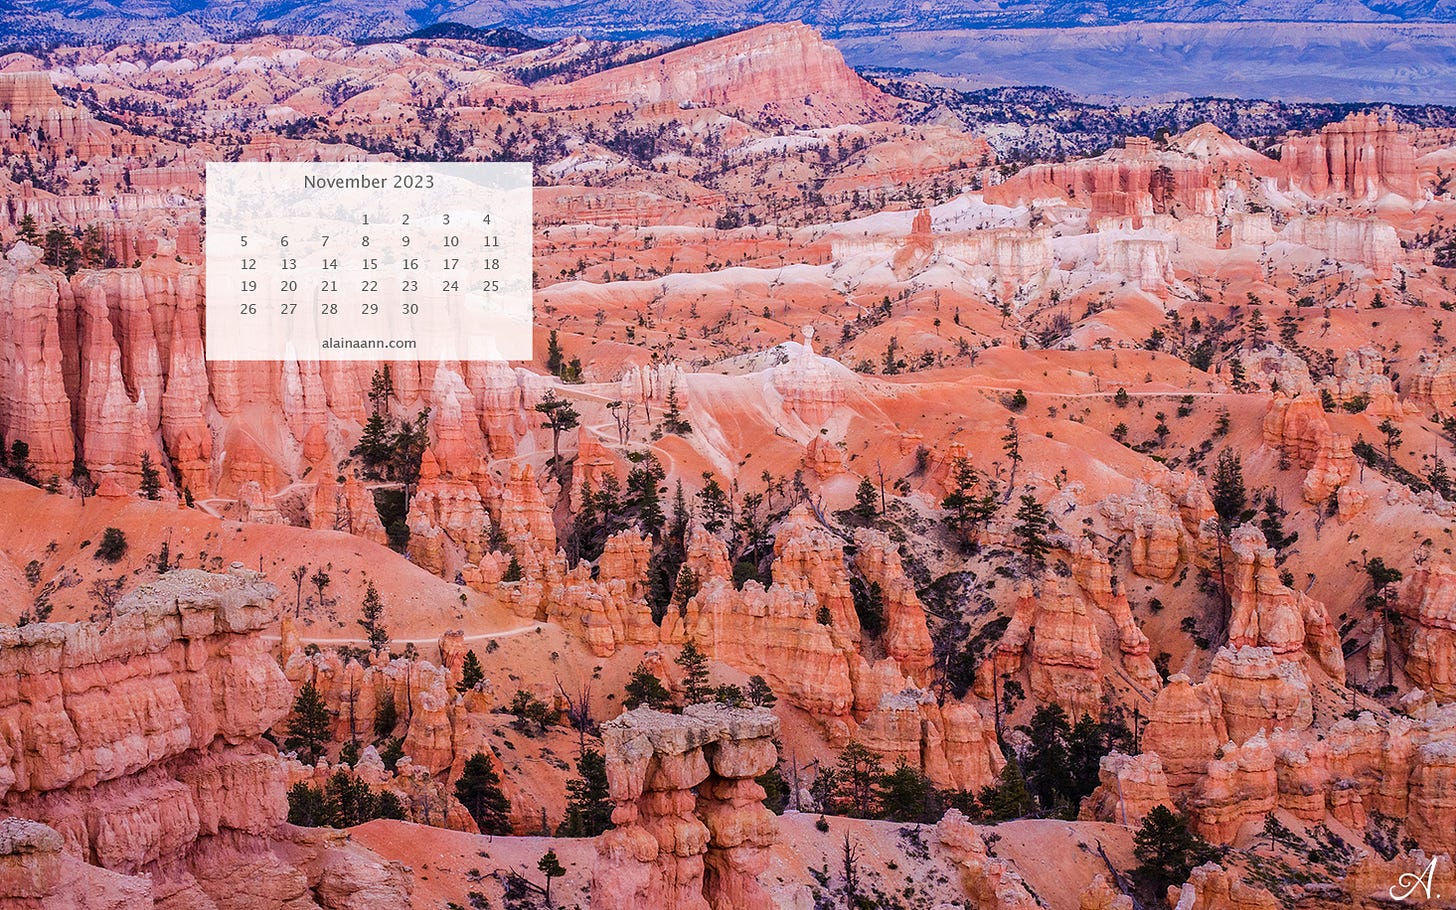 Landscape of orange and white hoodoos with a thin white trail curving between the rock formations. A calendar for the month of November is in the upper left corner.